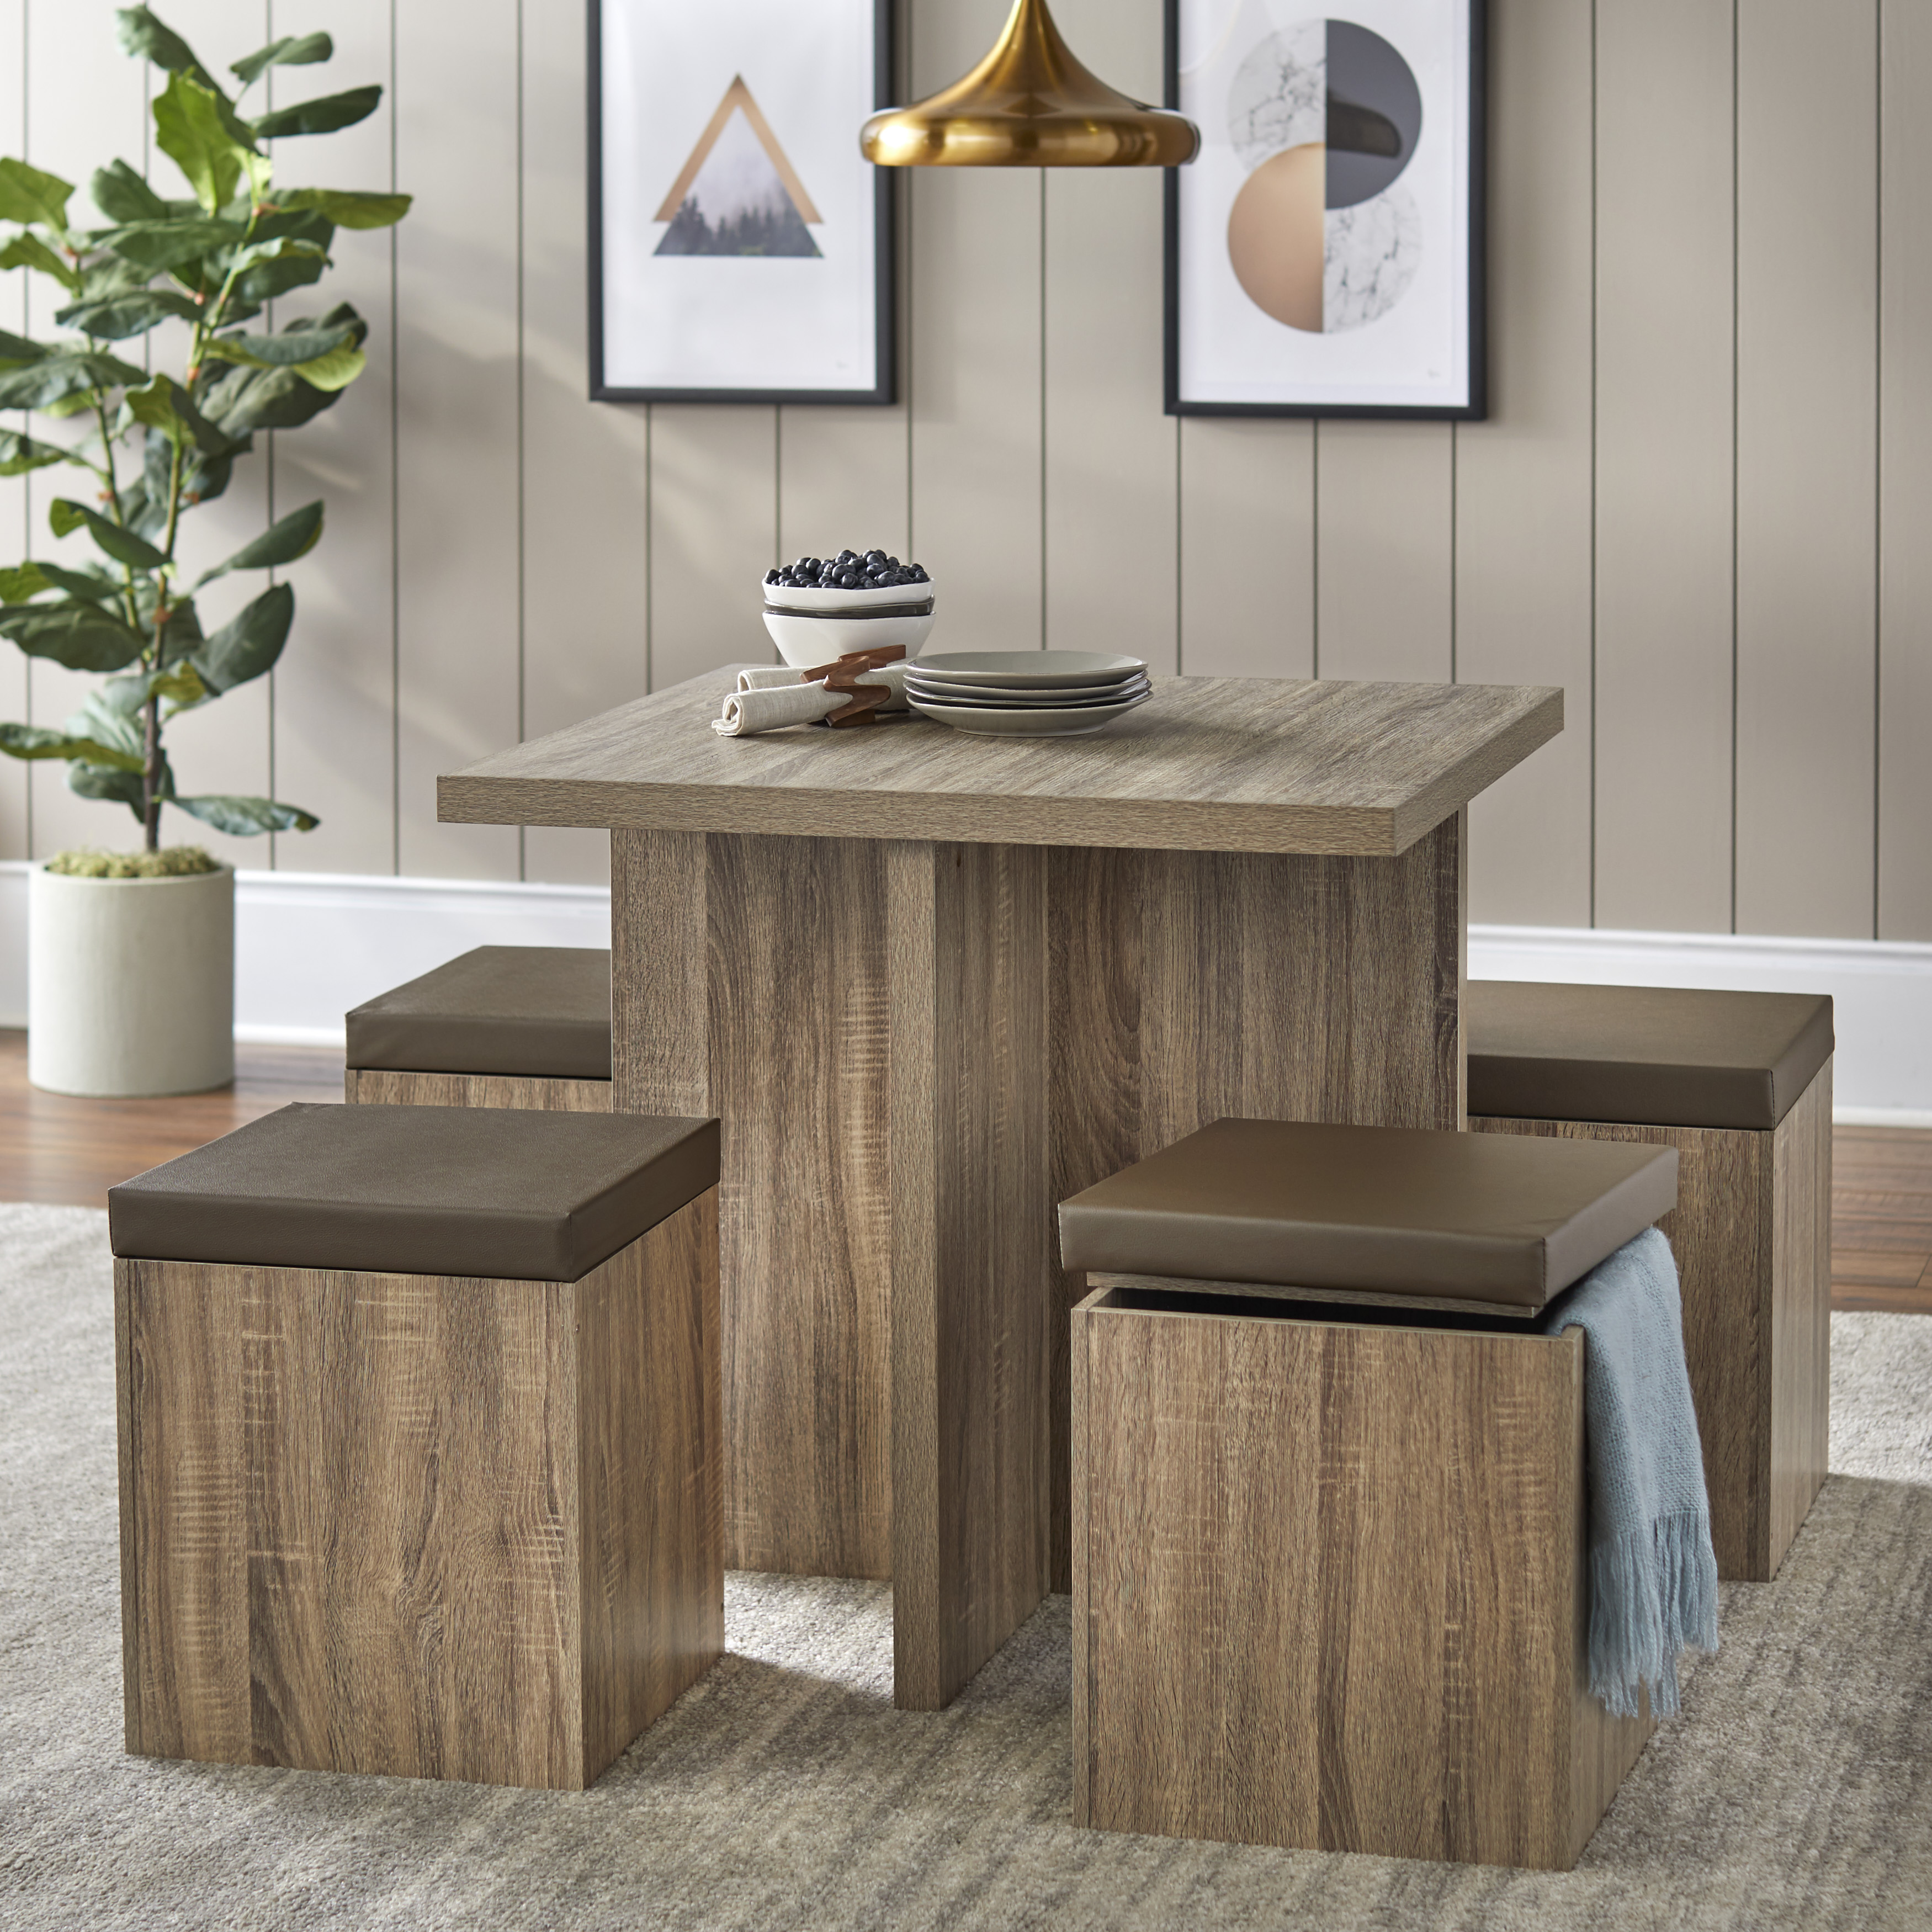 Baxter 5 Piece Dining Table Set - image 1 of 6